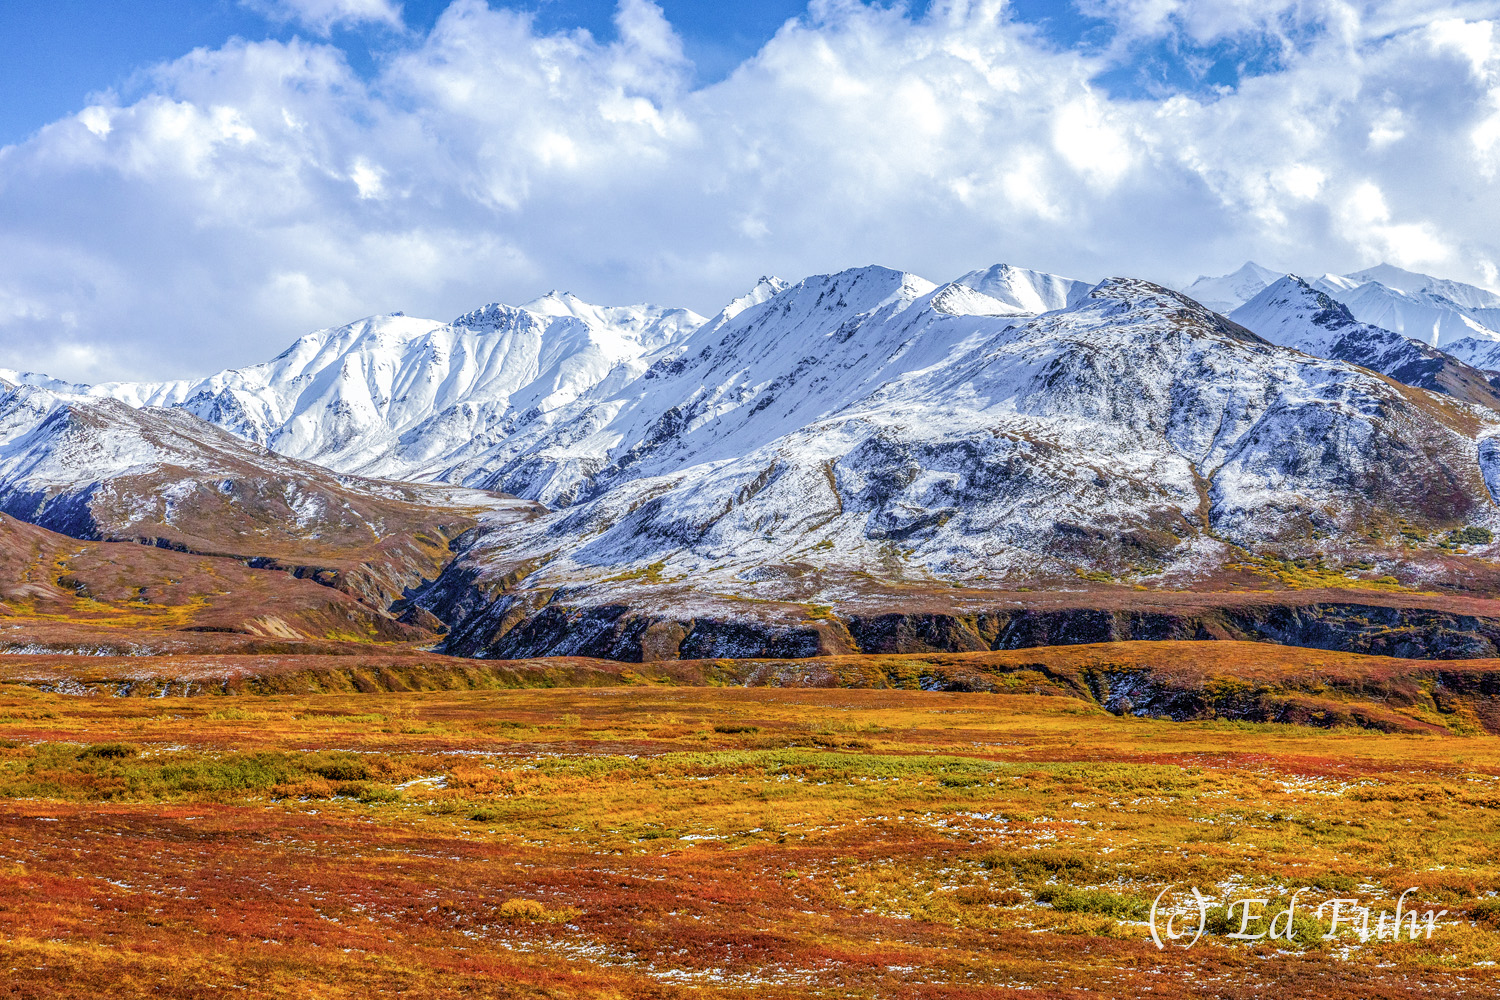 For a few days in early September the Denali tundra blazes red, orange and yellow, even as the first snows of fall are but a...